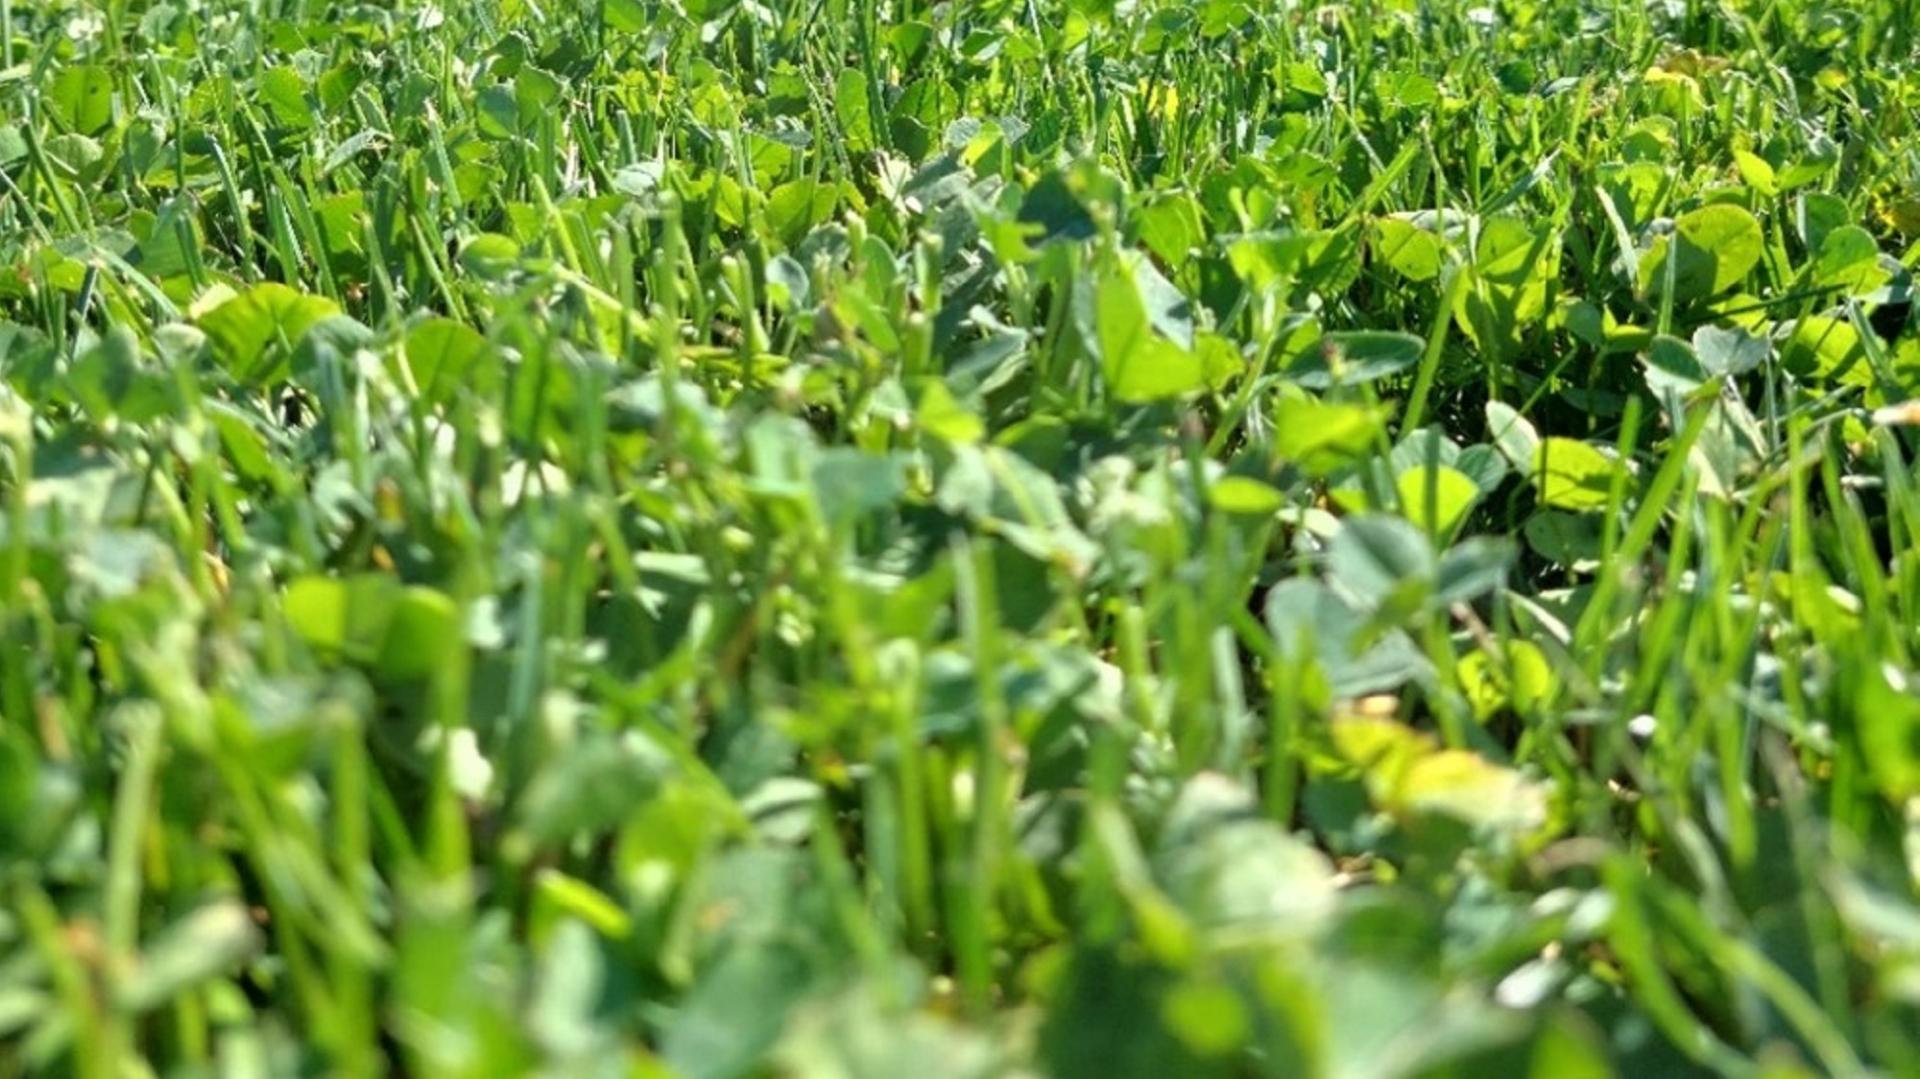 The Czech Republic's interest in Microclover® for lawns grows and we can understand why!